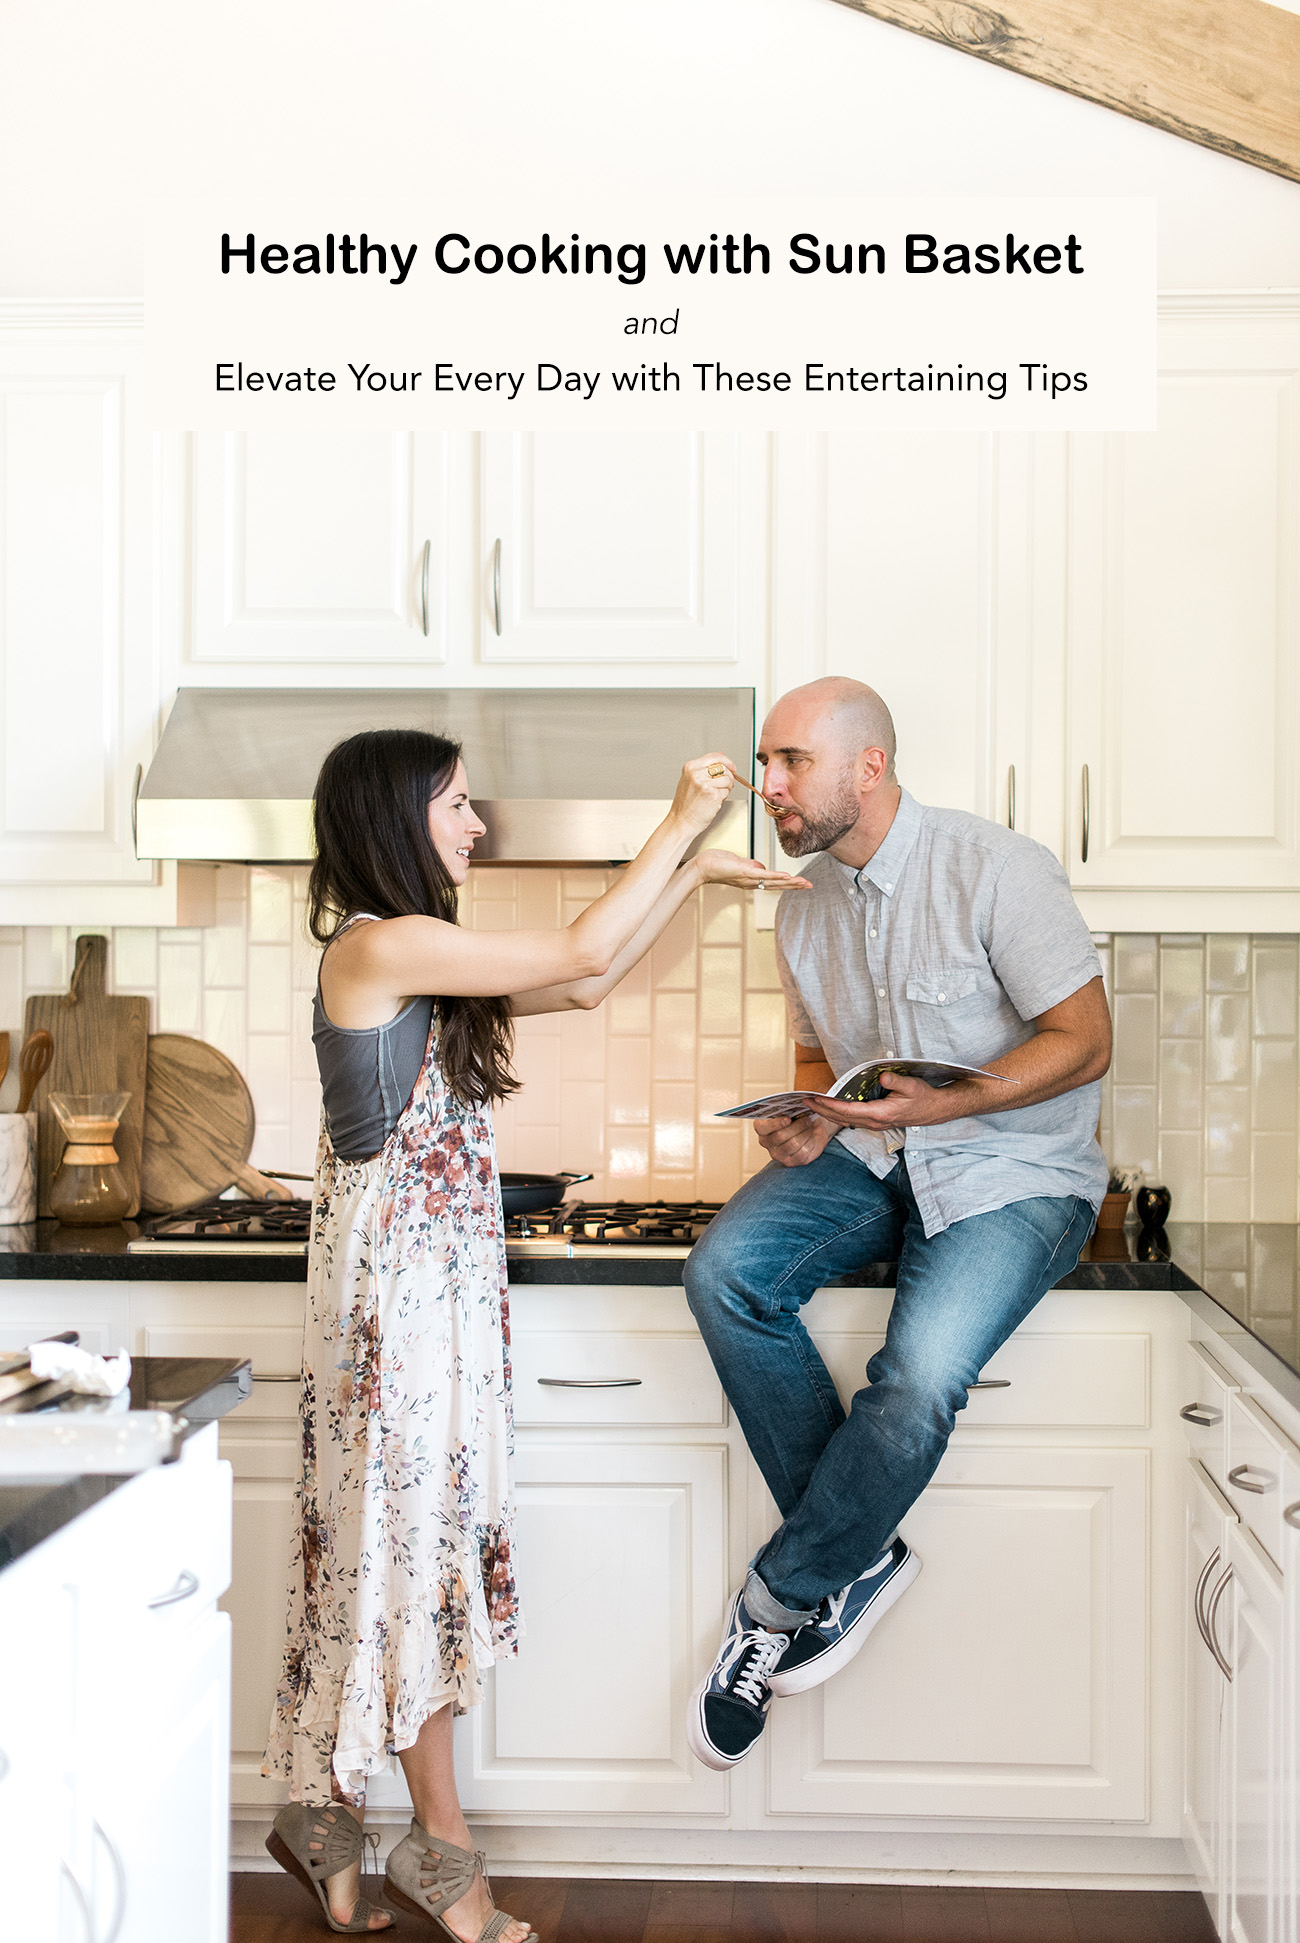 Healthy Cooking with Sun Basket and Elevate Your Every Day with These Entertaining Tips